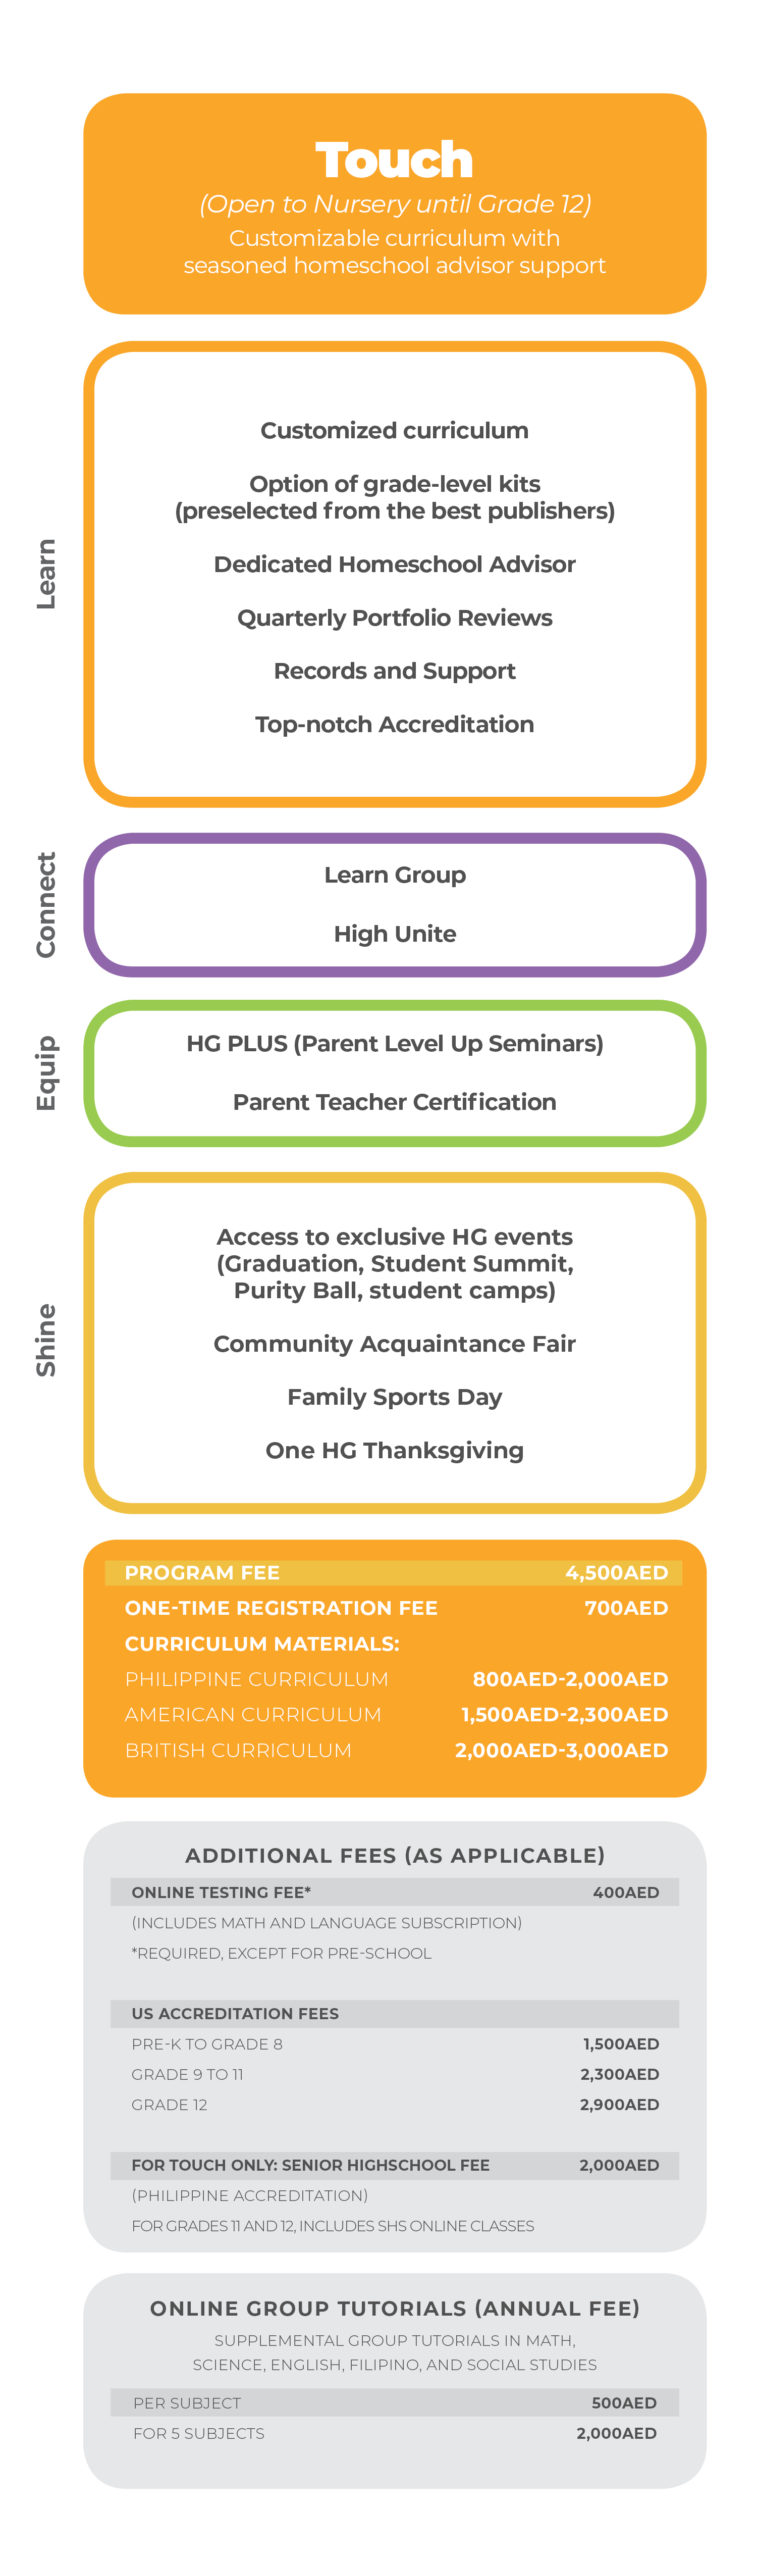 HGME Programs with Pricing 10052020